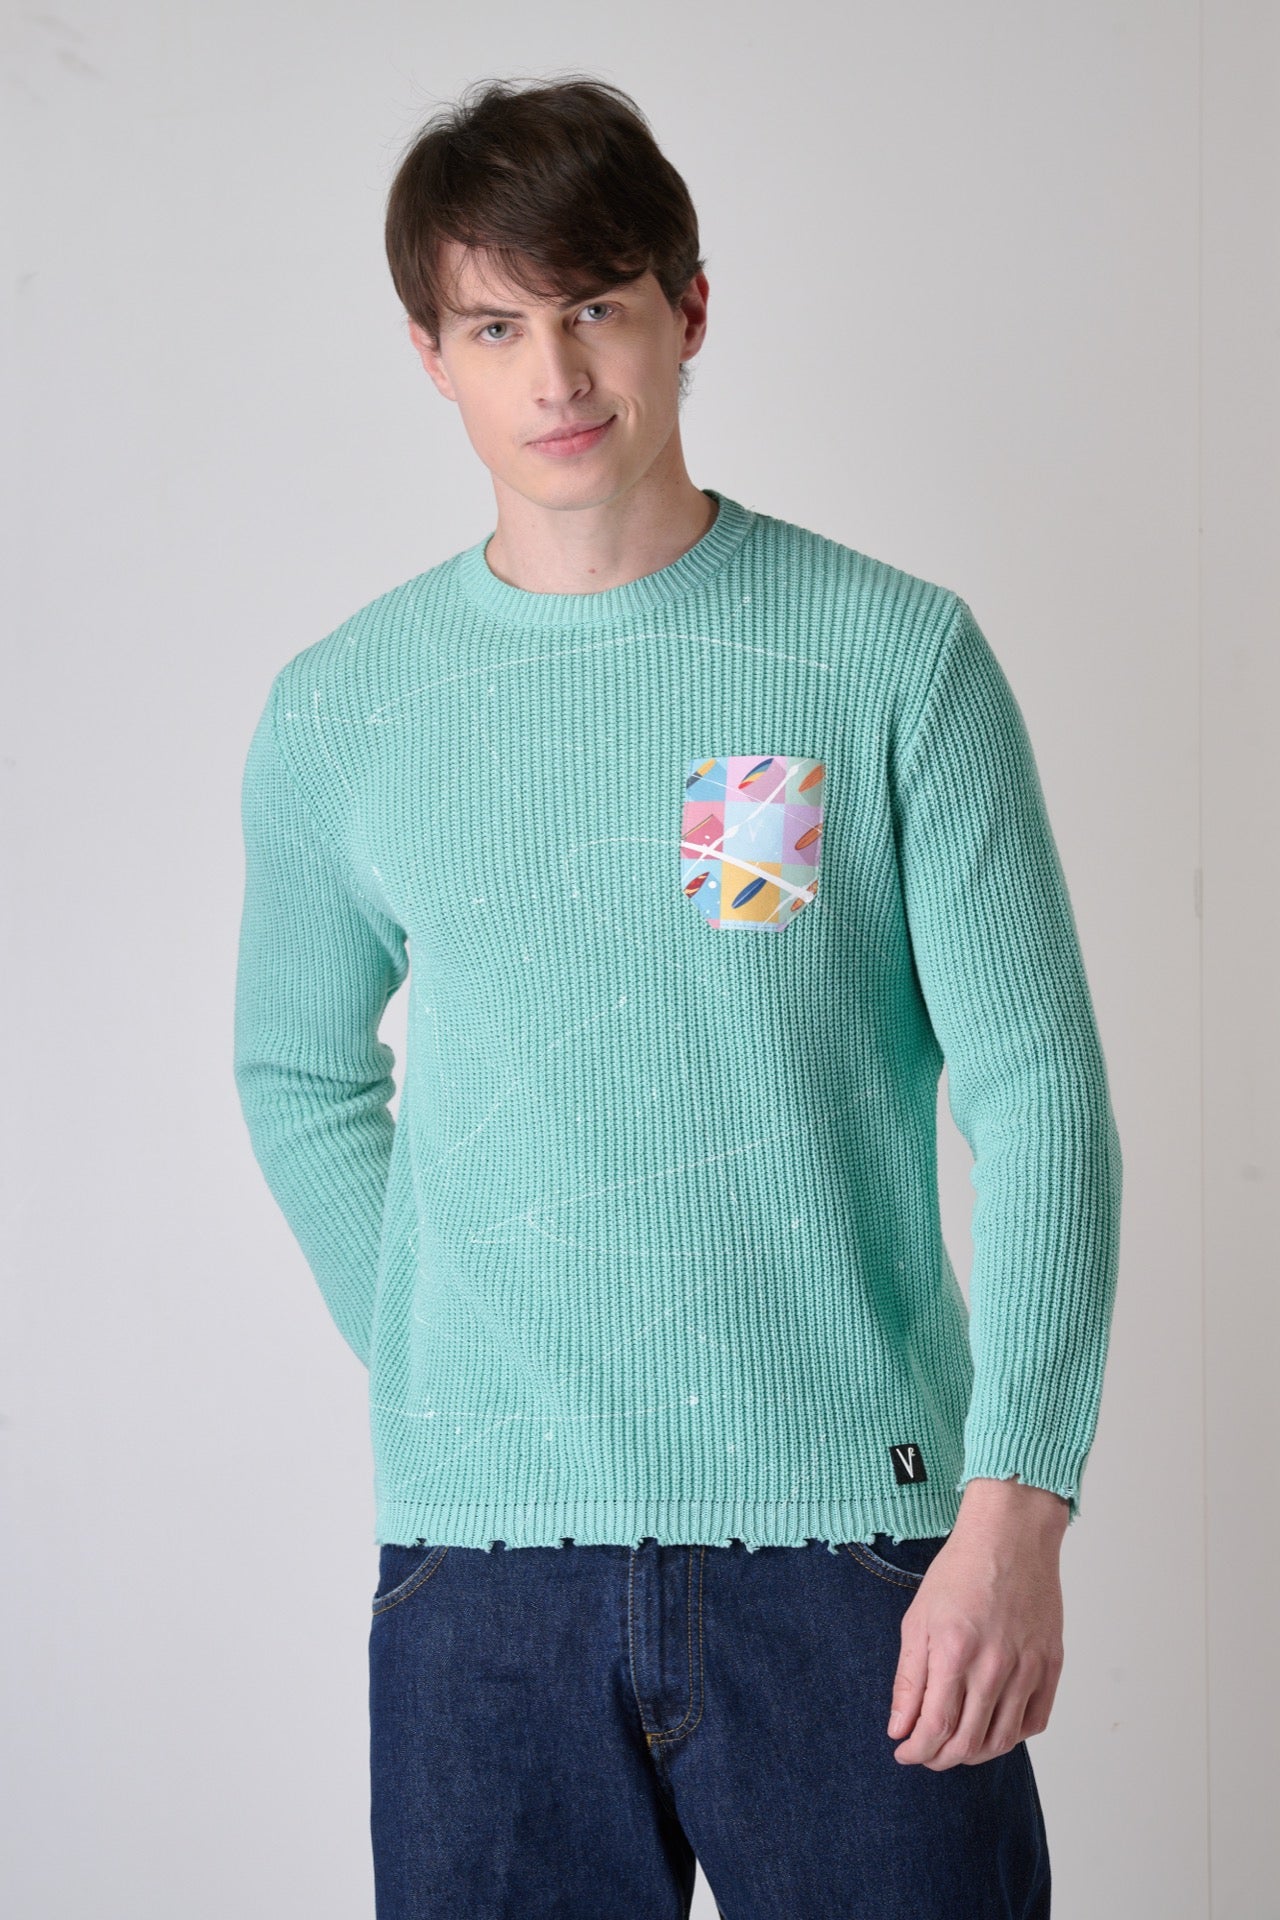 Mint Green crew neck sweater with paint splatter tears and V2 fabric pocket